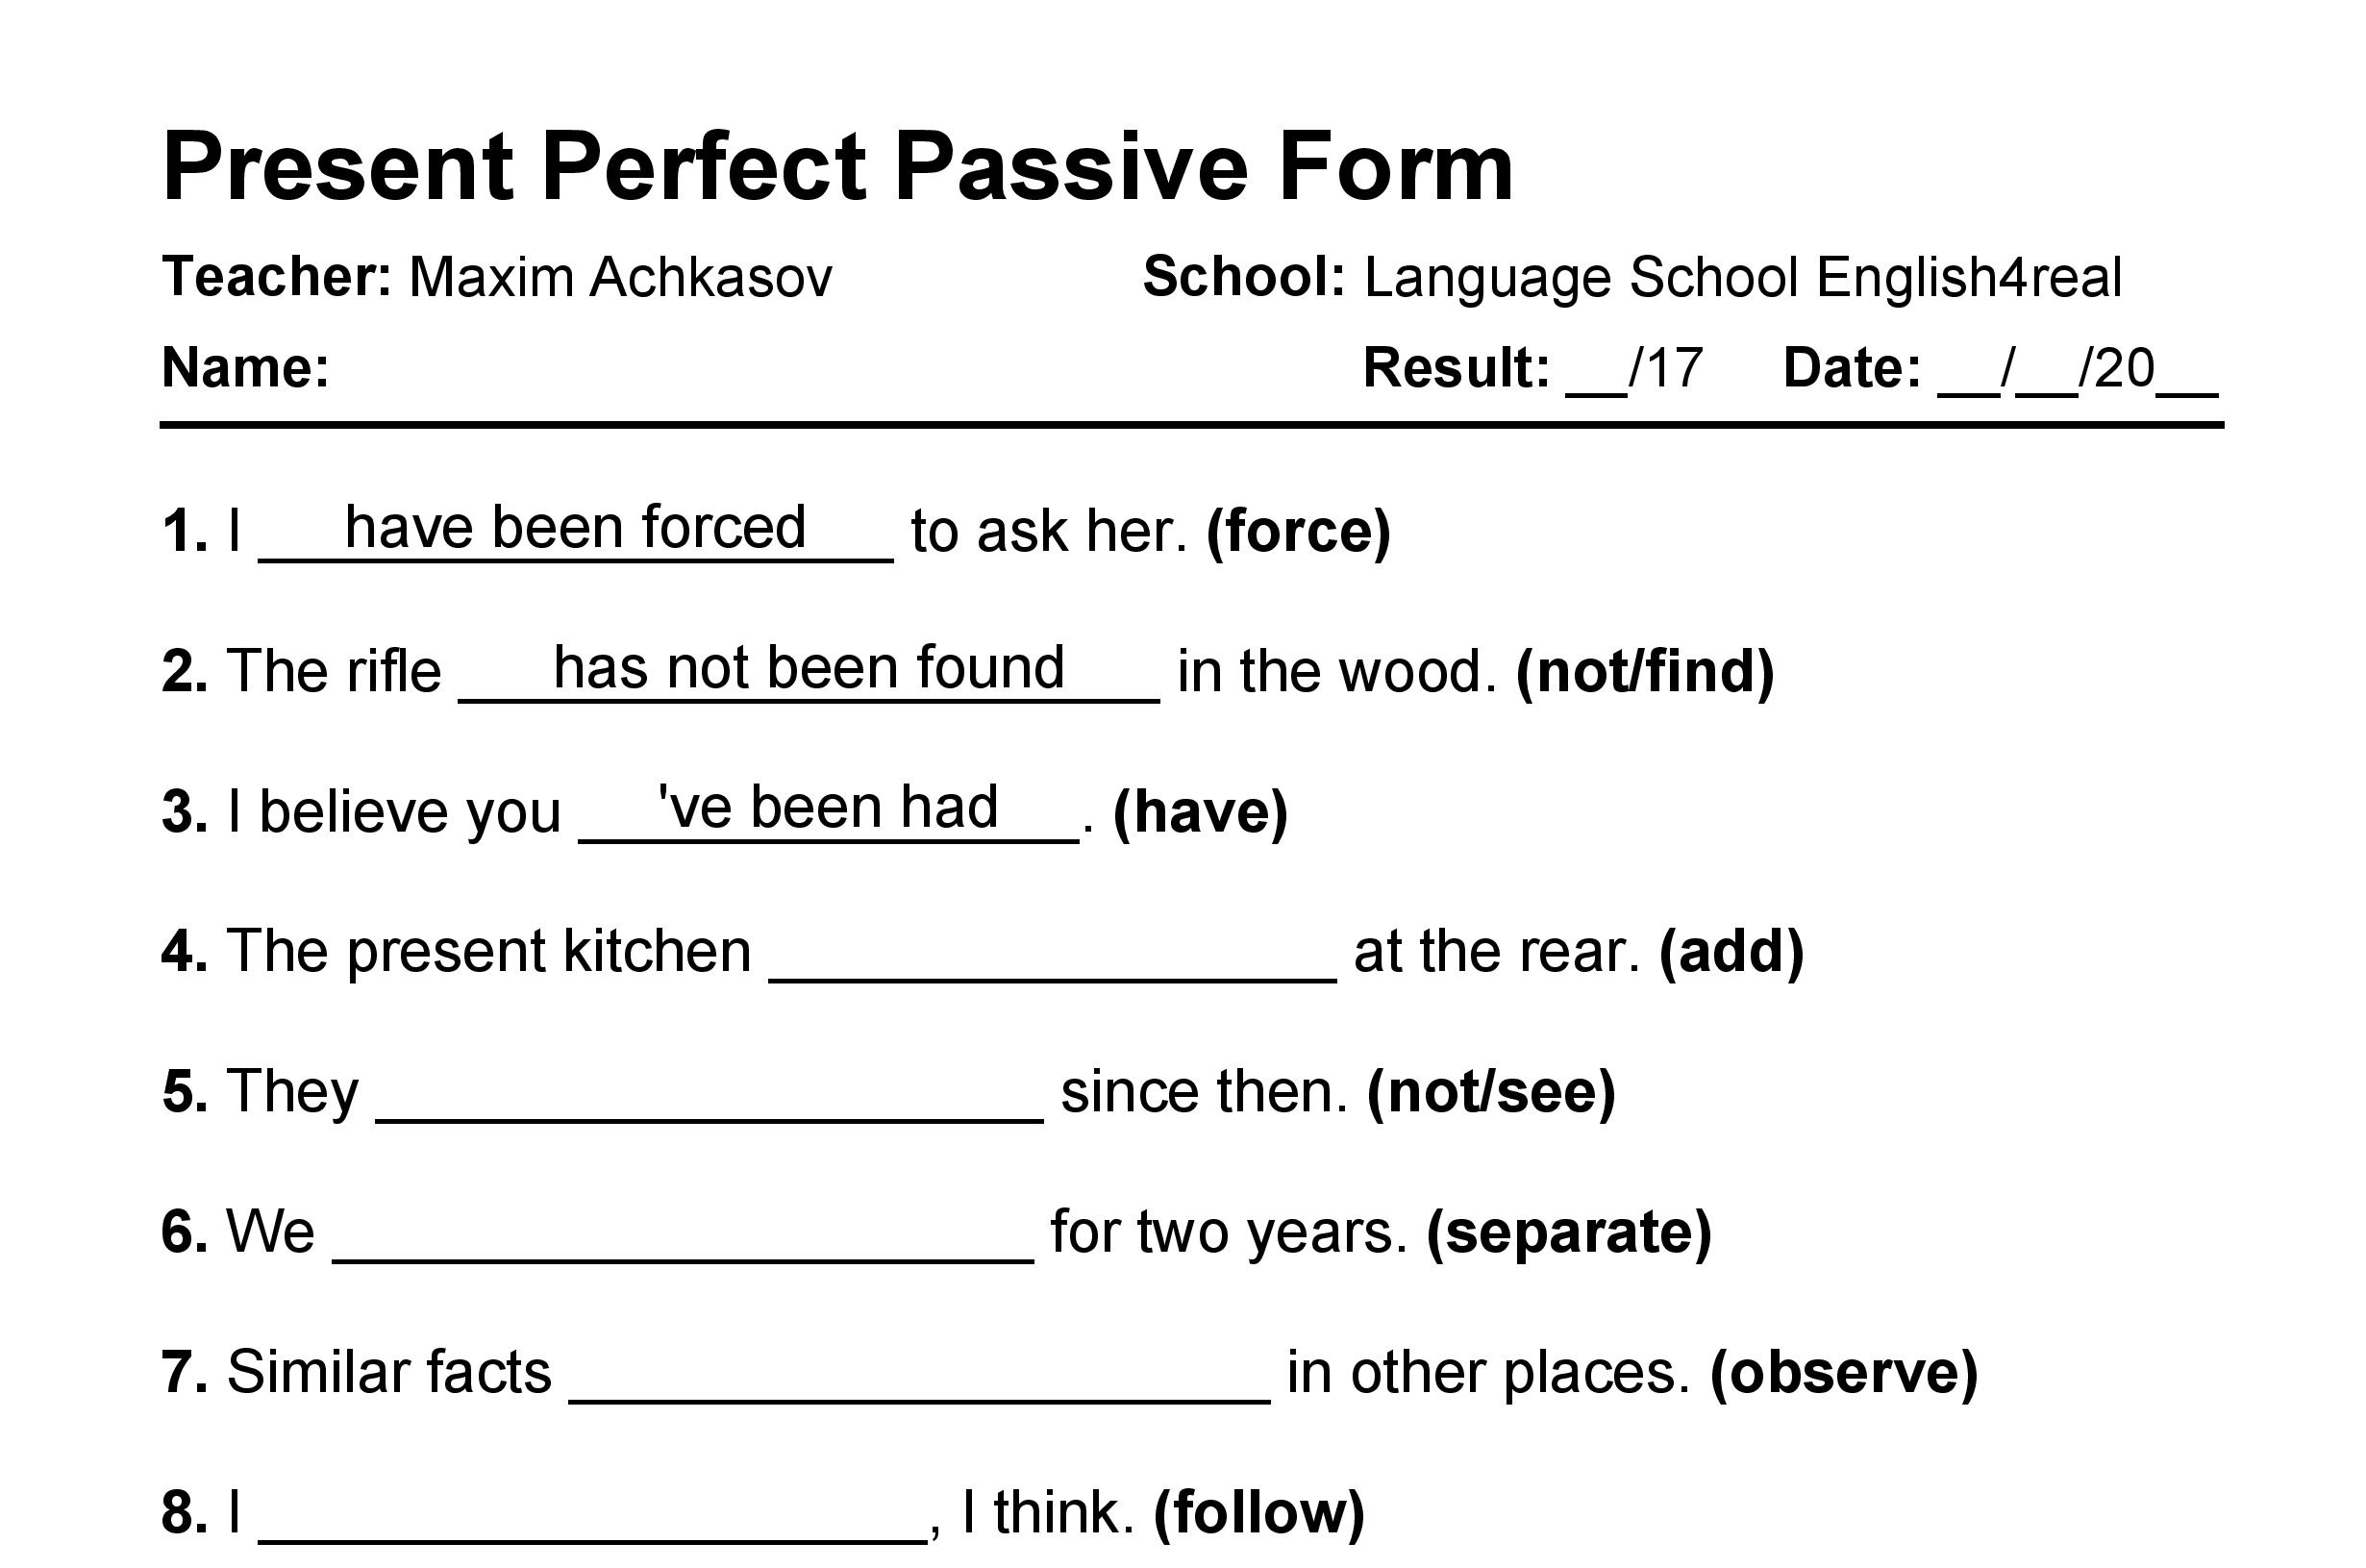 English grammar fill in the blanks exercises with answers in PDF - Present Perfect Passive